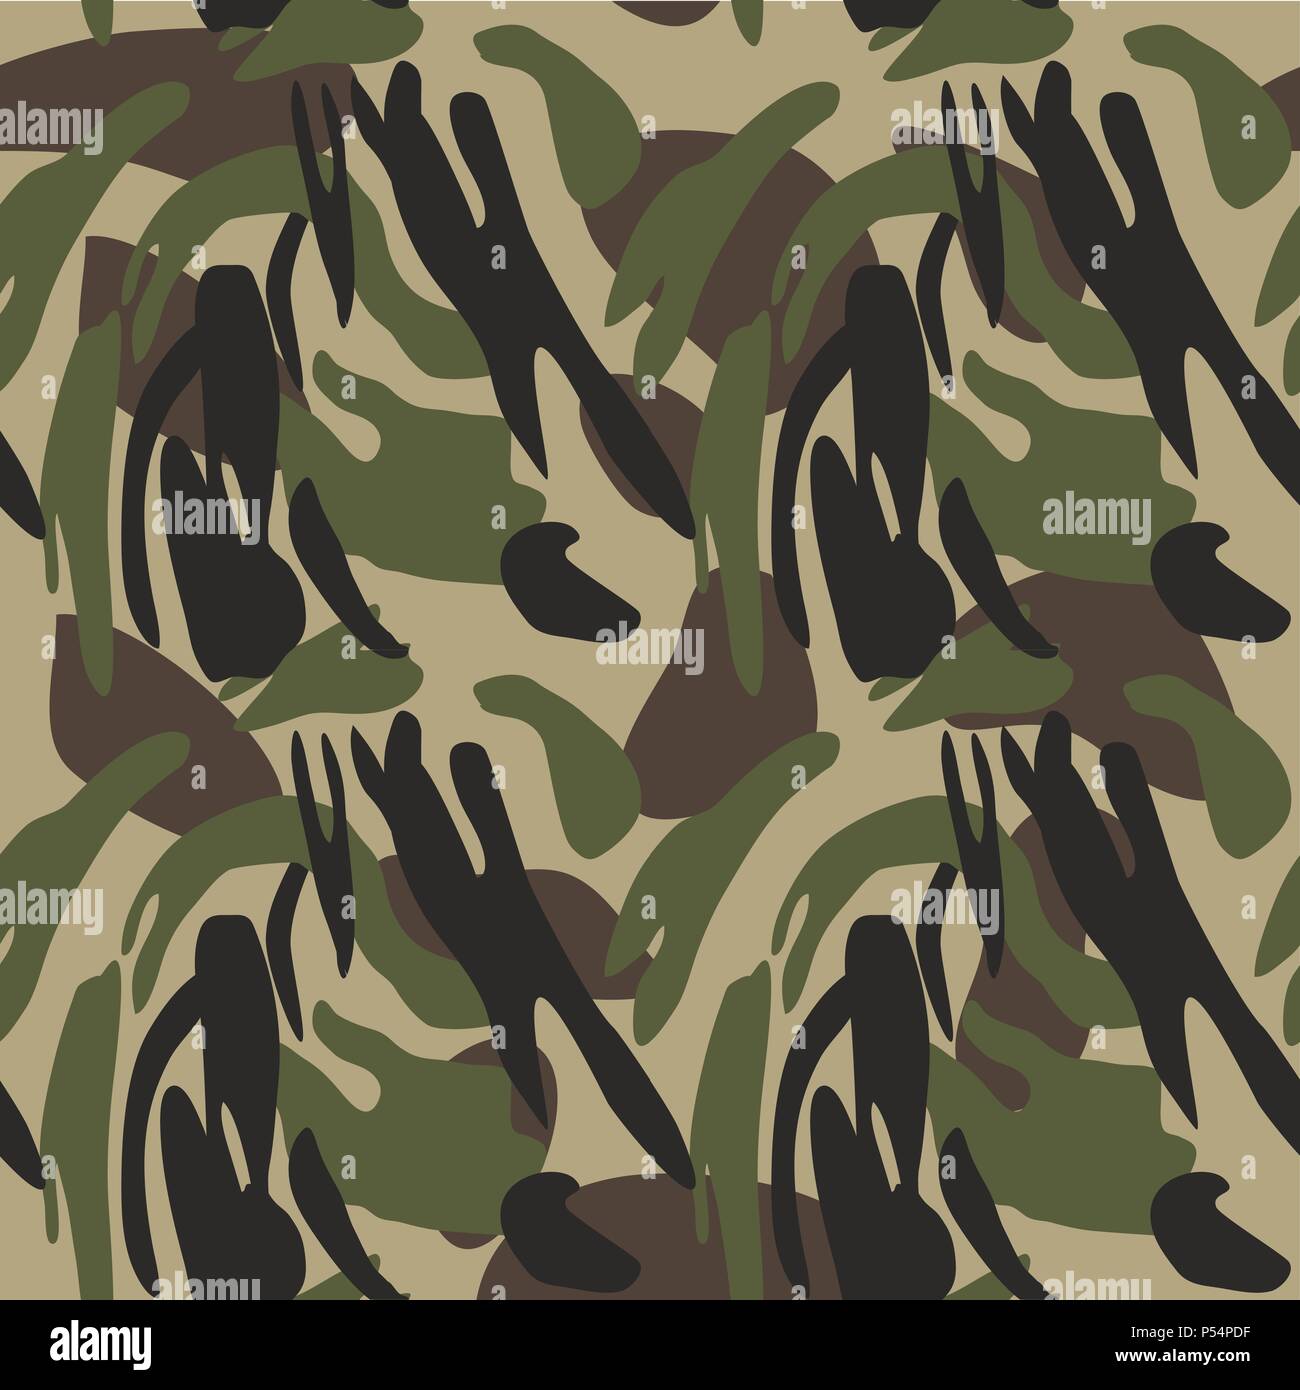 Camouflage pattern background seamless vector illustration. Classic military clothing style. Camo repeat texture shirt print. Green brown black olive  Stock Vector